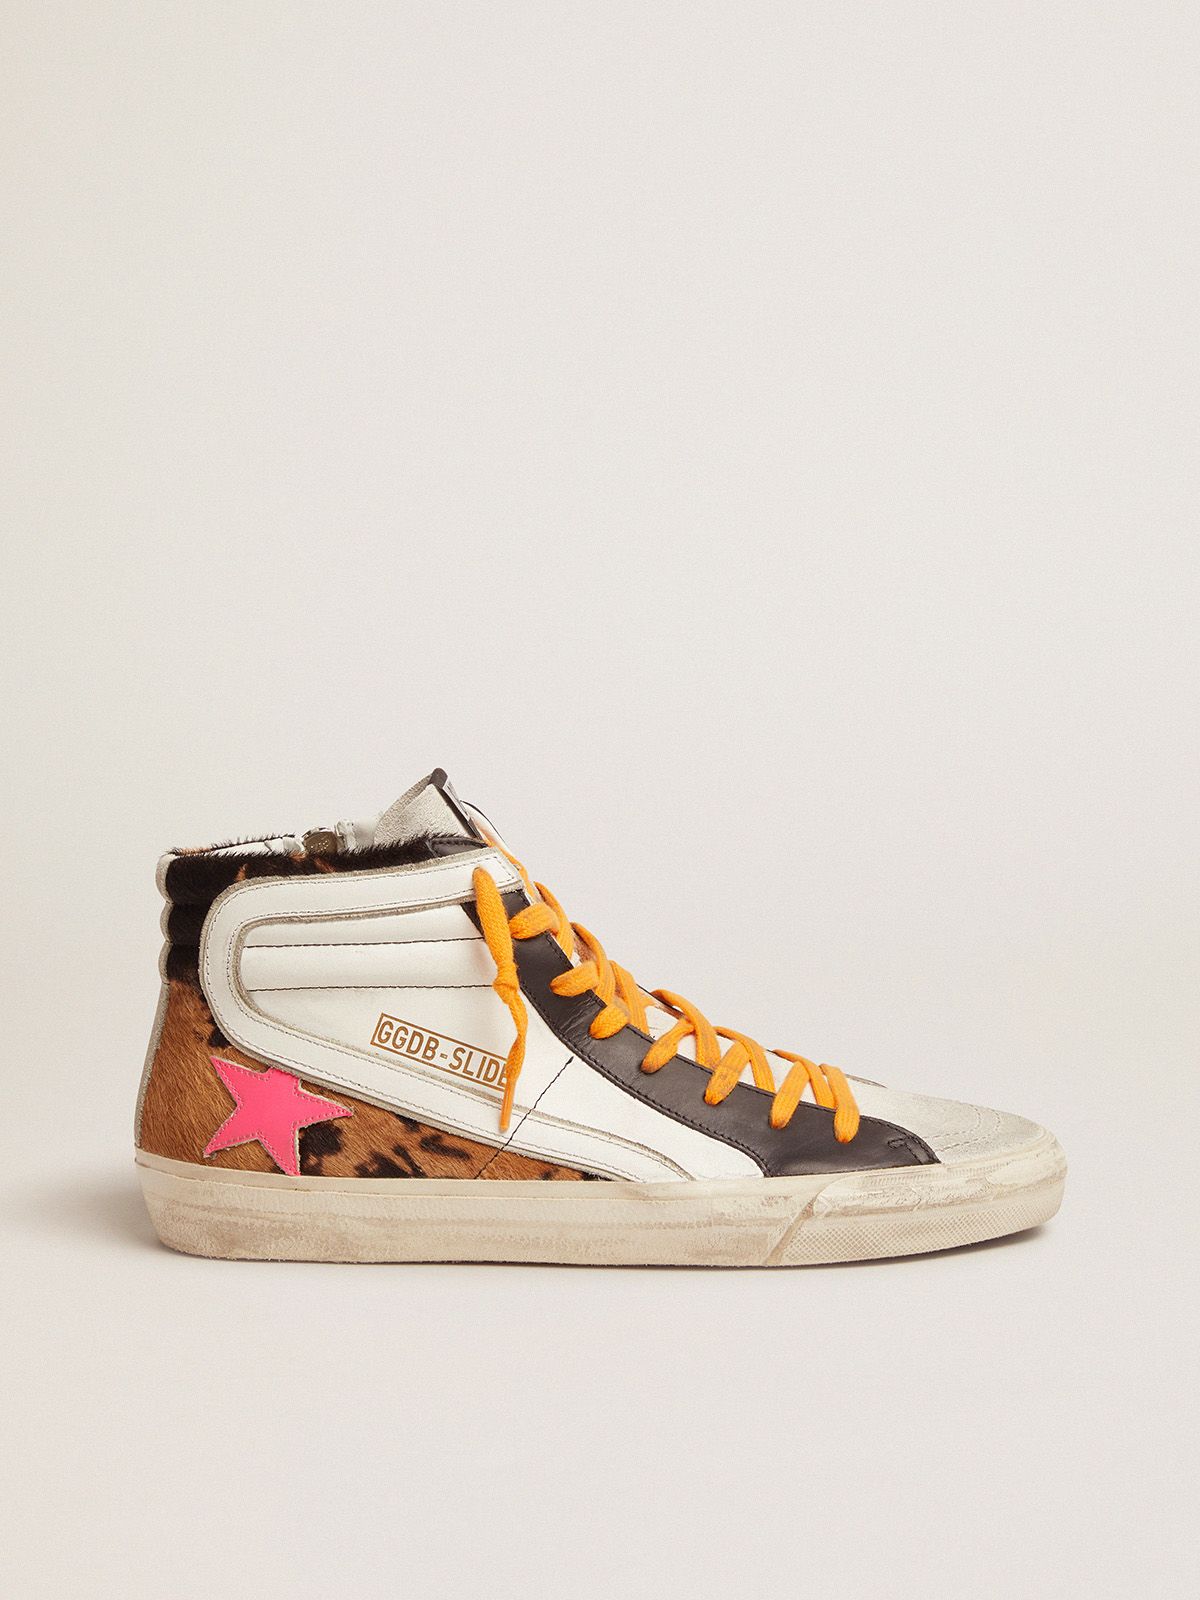 golden goose in orange laces fuchsia a skin, sneakers star with leather and Slide pony suede